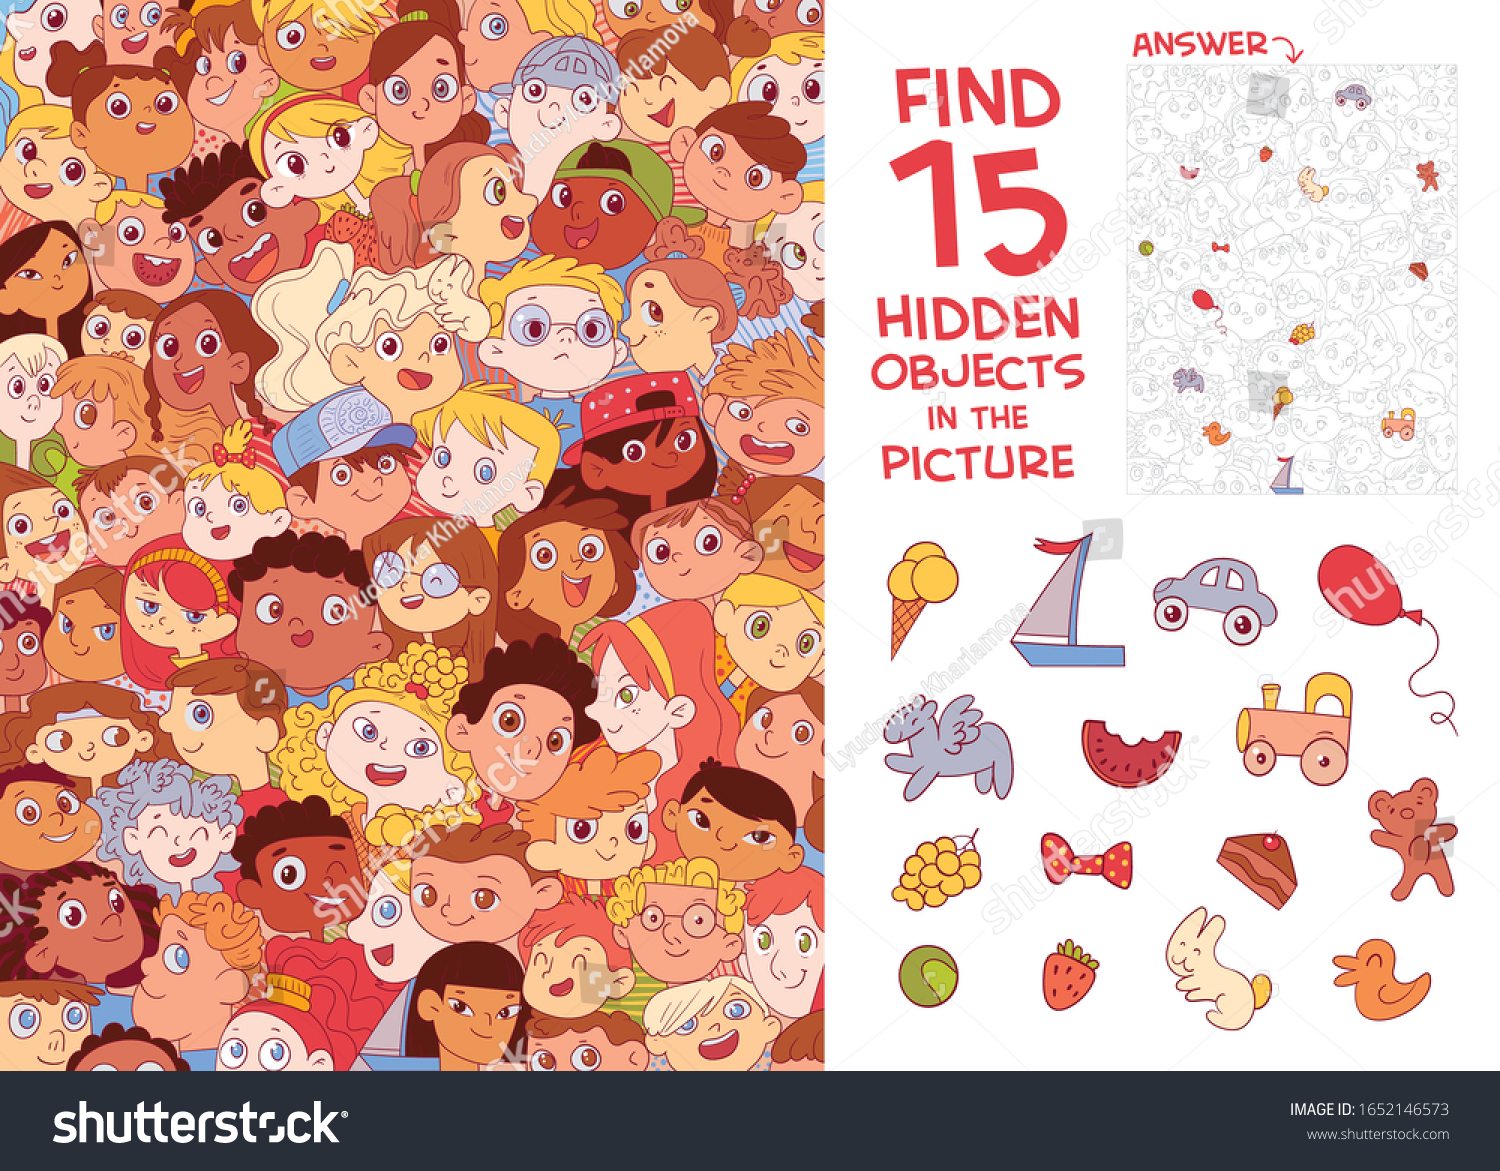 Ethnic diversity of children's faces. International Children's Day. Find 15 hidden objects in the picture. Puzzle Hidden Items. Funny cartoon character. Vector illustration #1652146573